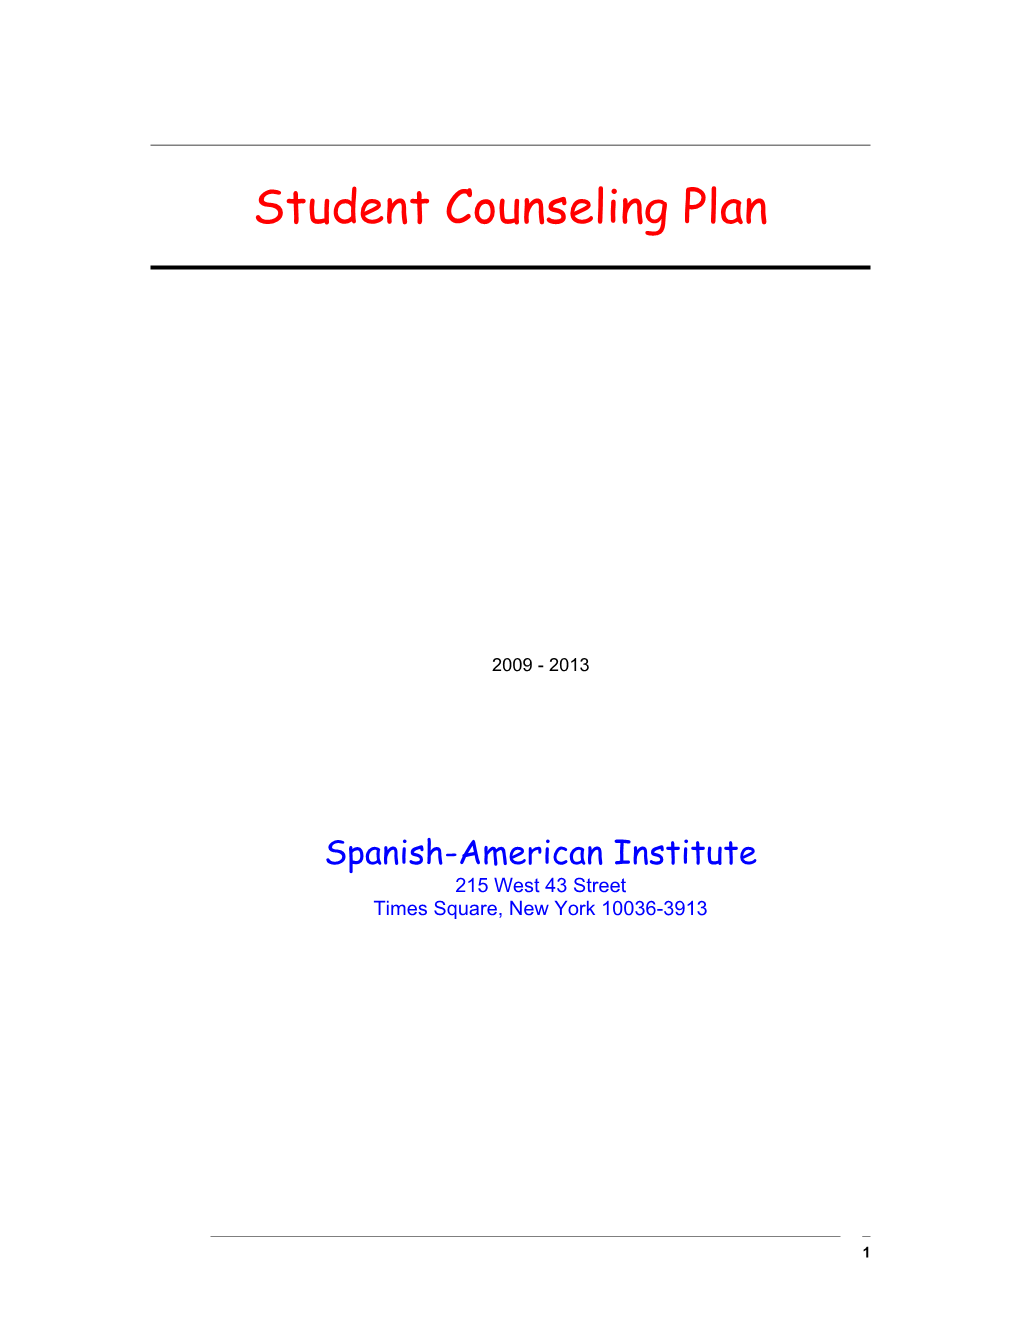 Exhibit H. Student Counseling Plan